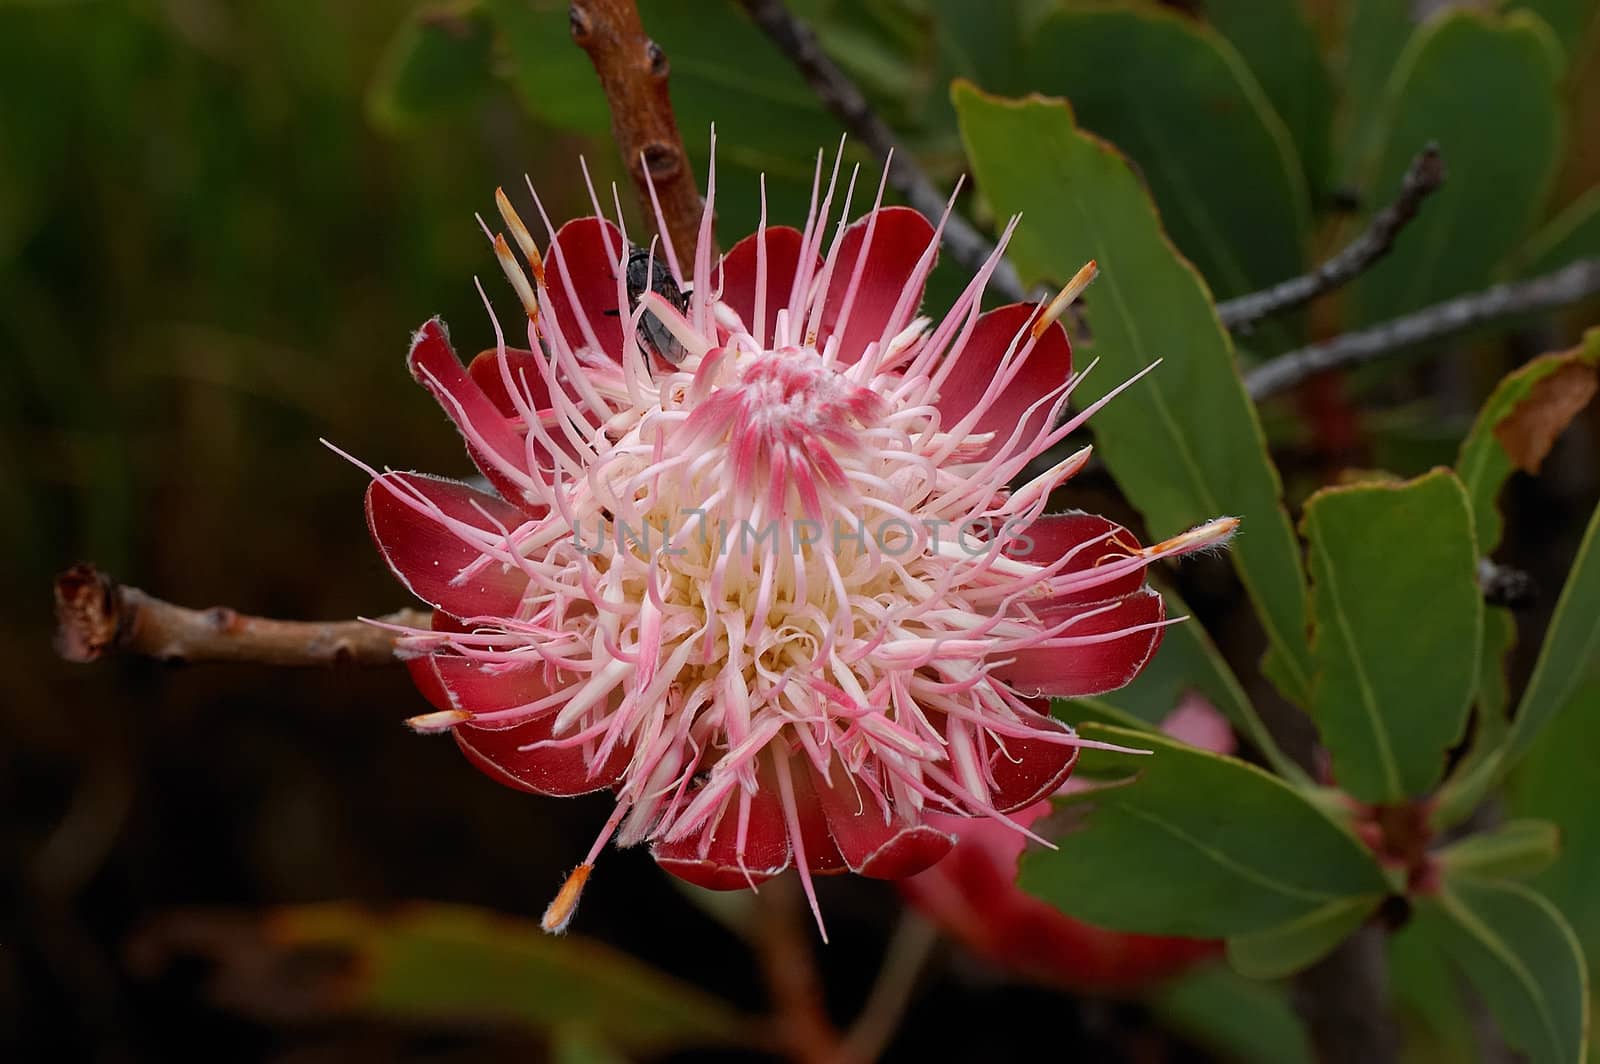 Protea Caffra, the Common Suger Bush, a small tree growing on the mountains in the Marakele National Park, Limpopo, South Africa